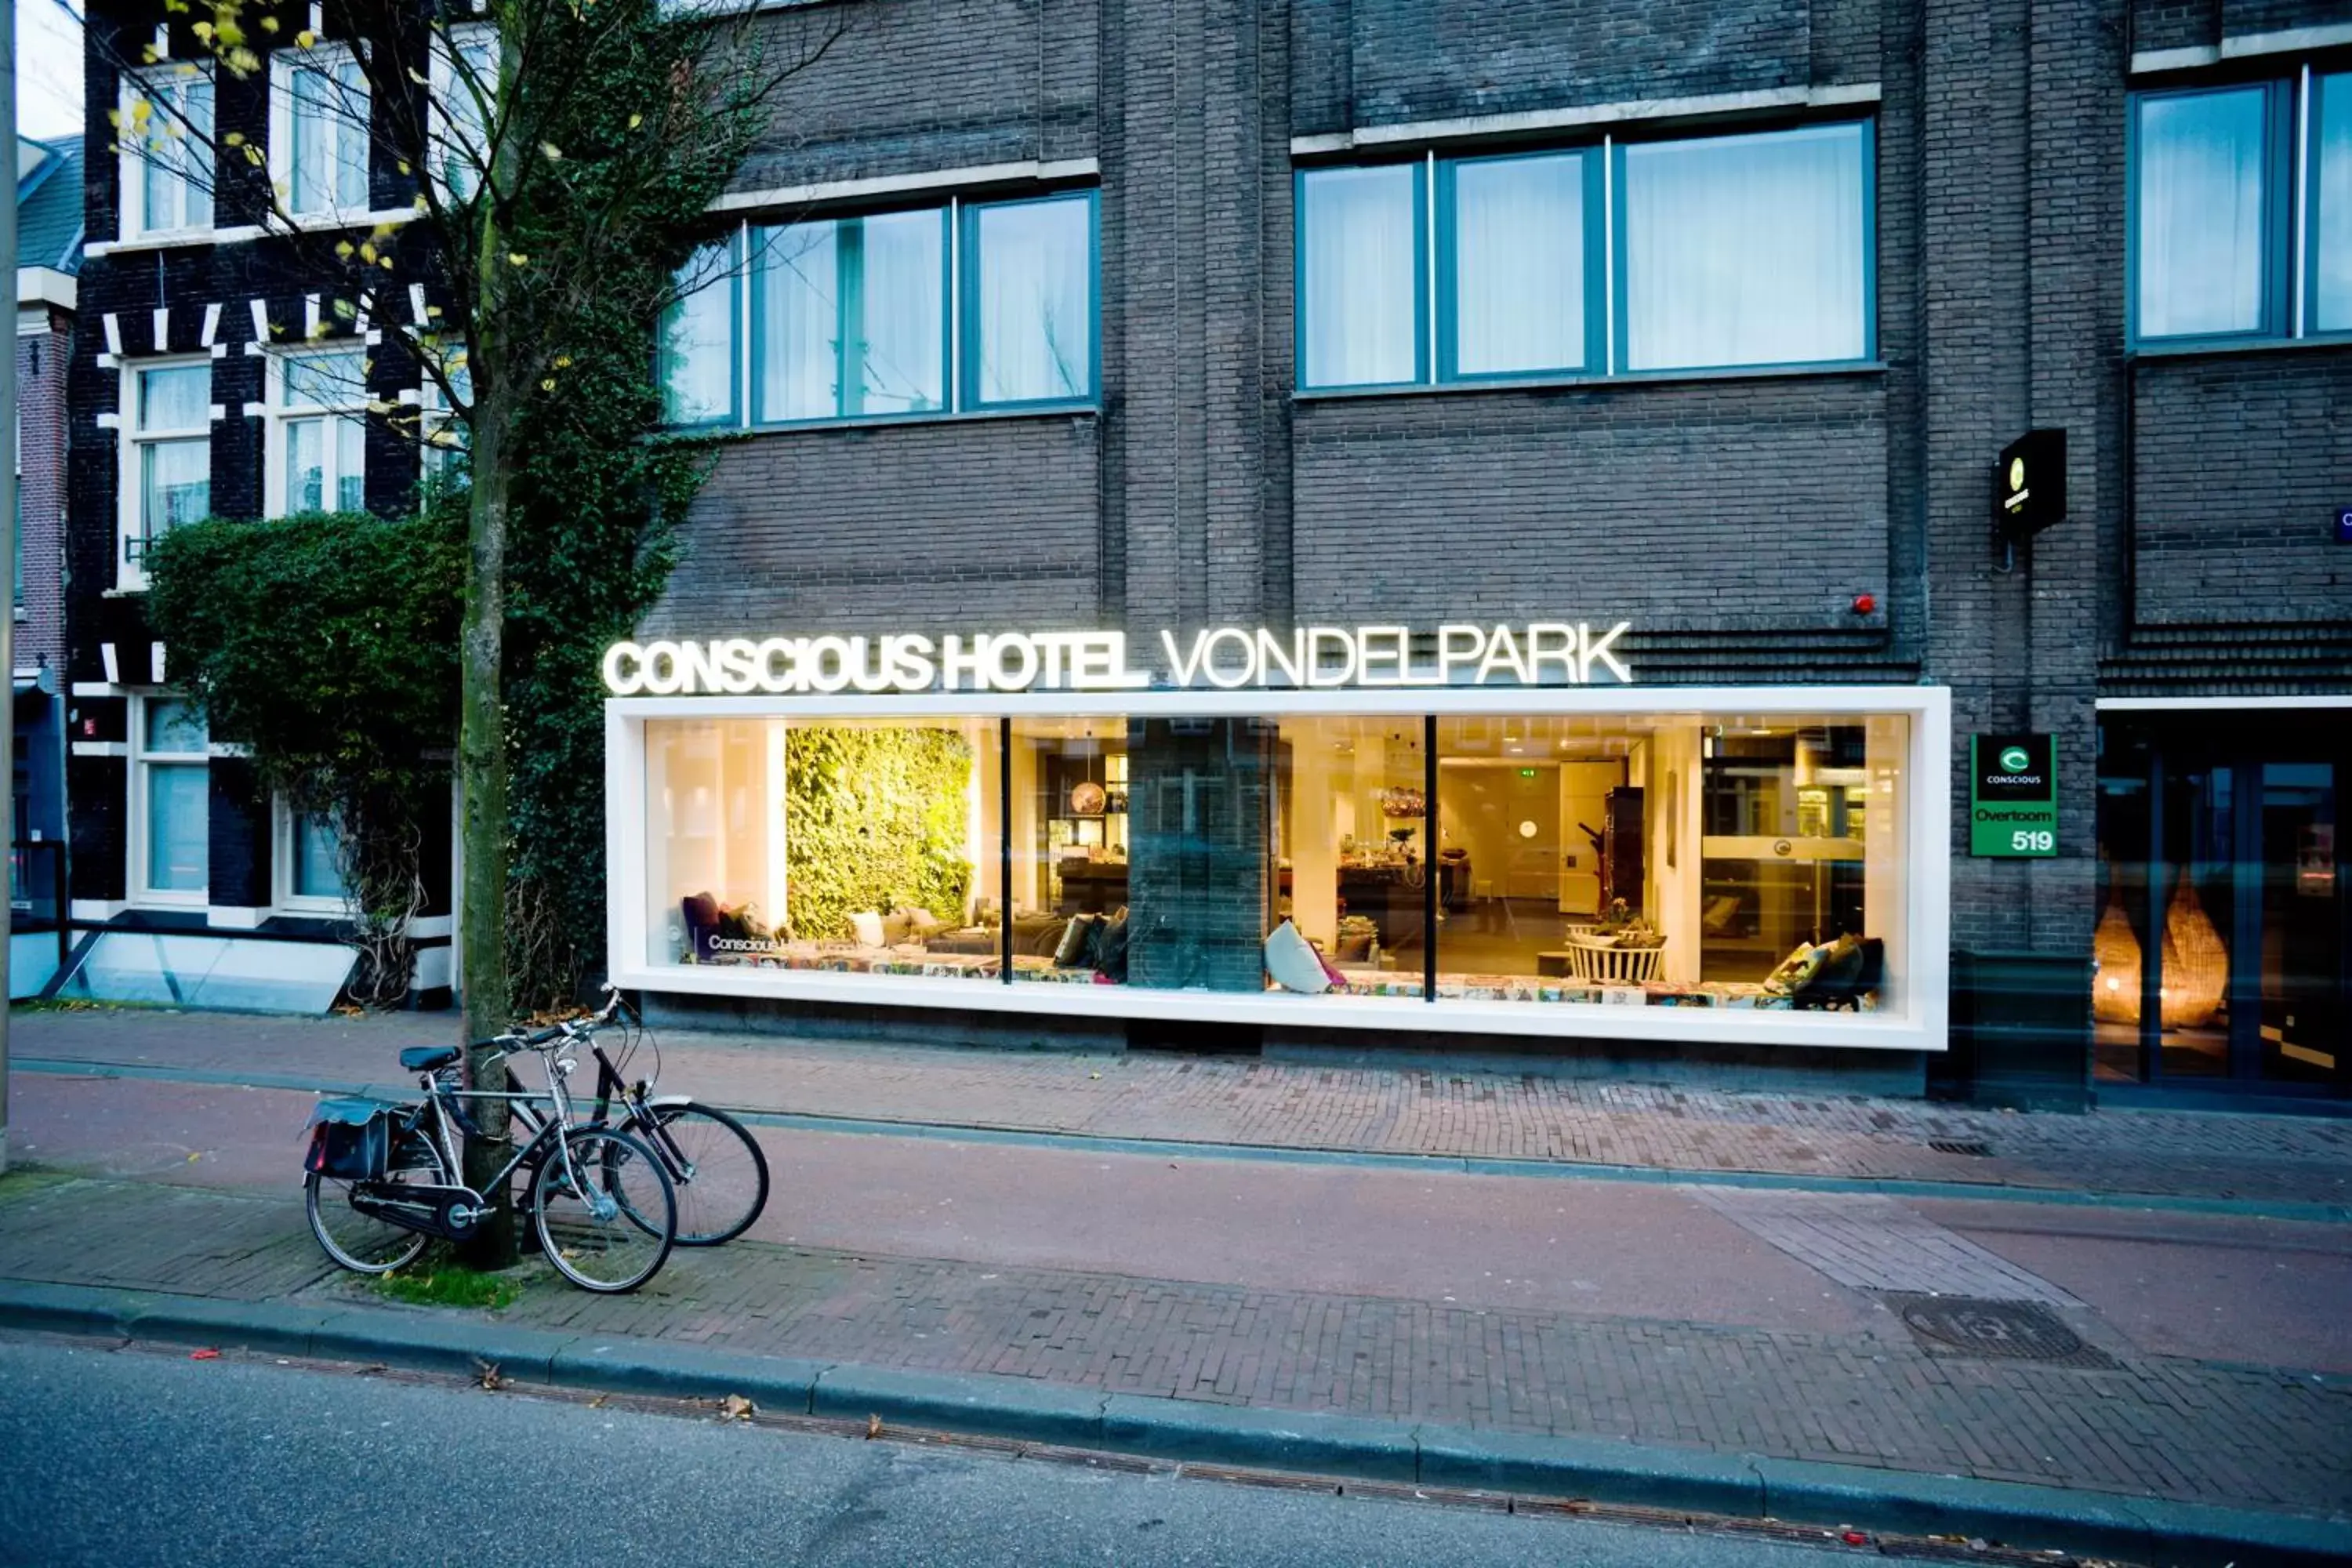 Area and facilities, Property Building in Conscious Hotel Vondelpark